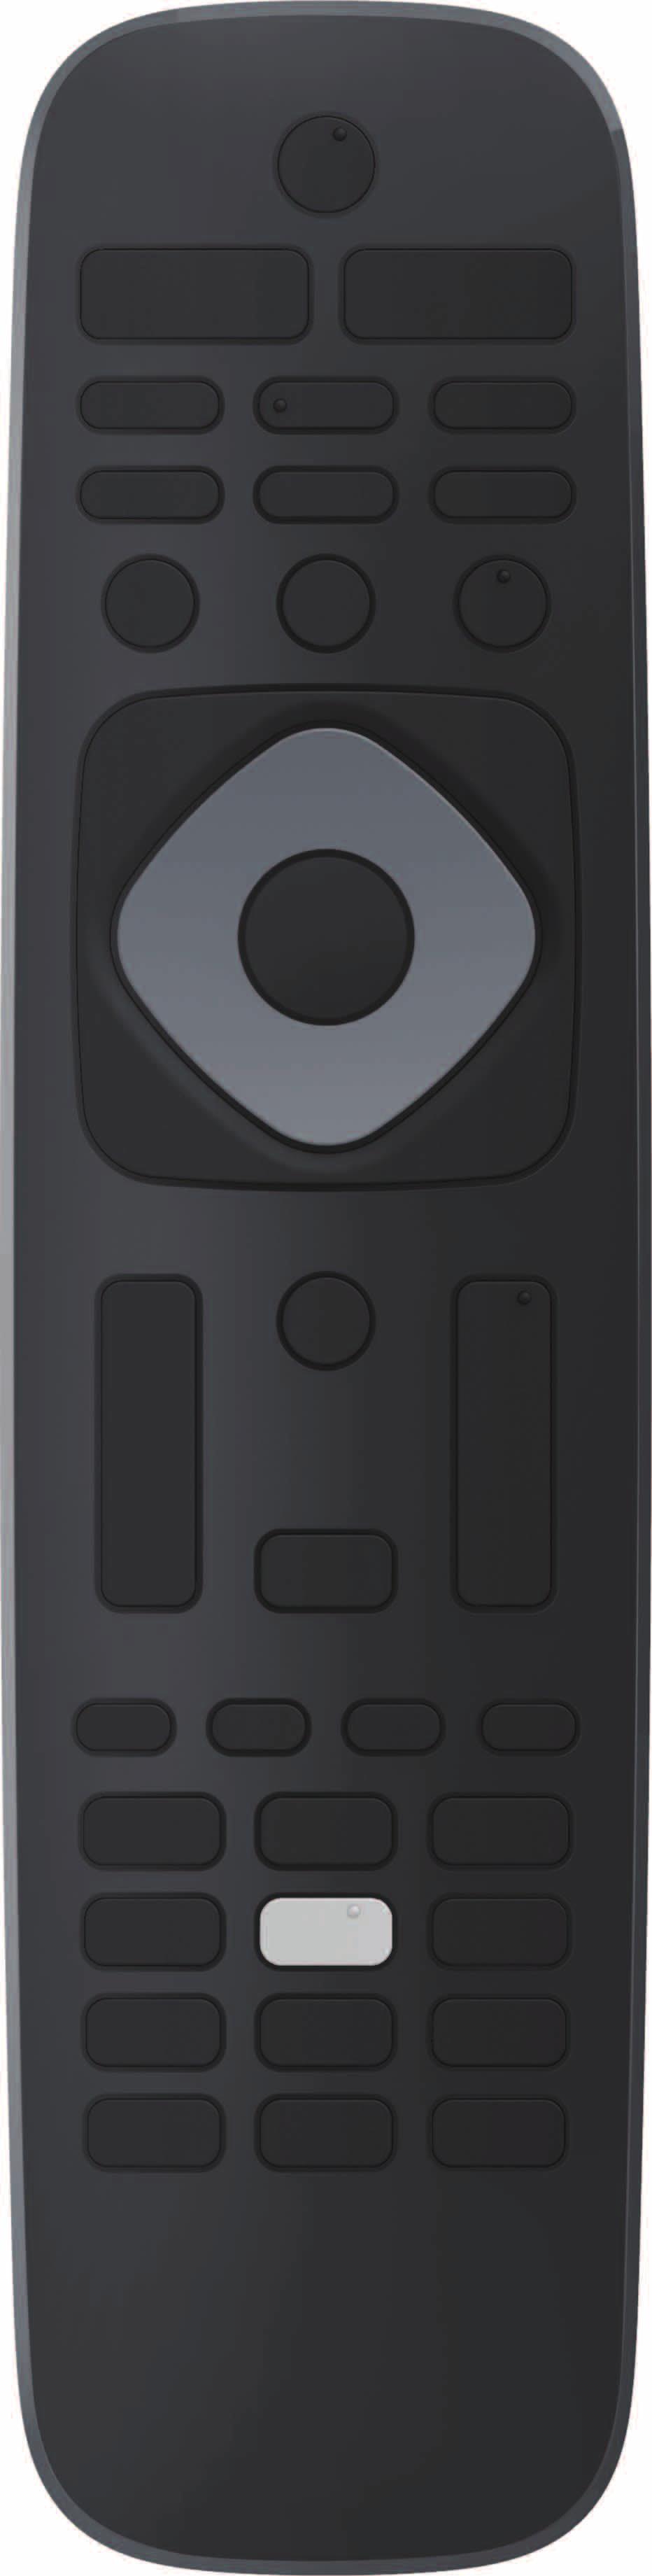 55PFL4901, 50PFL4901, 43PFL4901 serial numbers beginning with DS7 Remote control u t s r q p o a b c d e f g h i j k l m n (POWER) Turns the TV on from standby or off to standby.